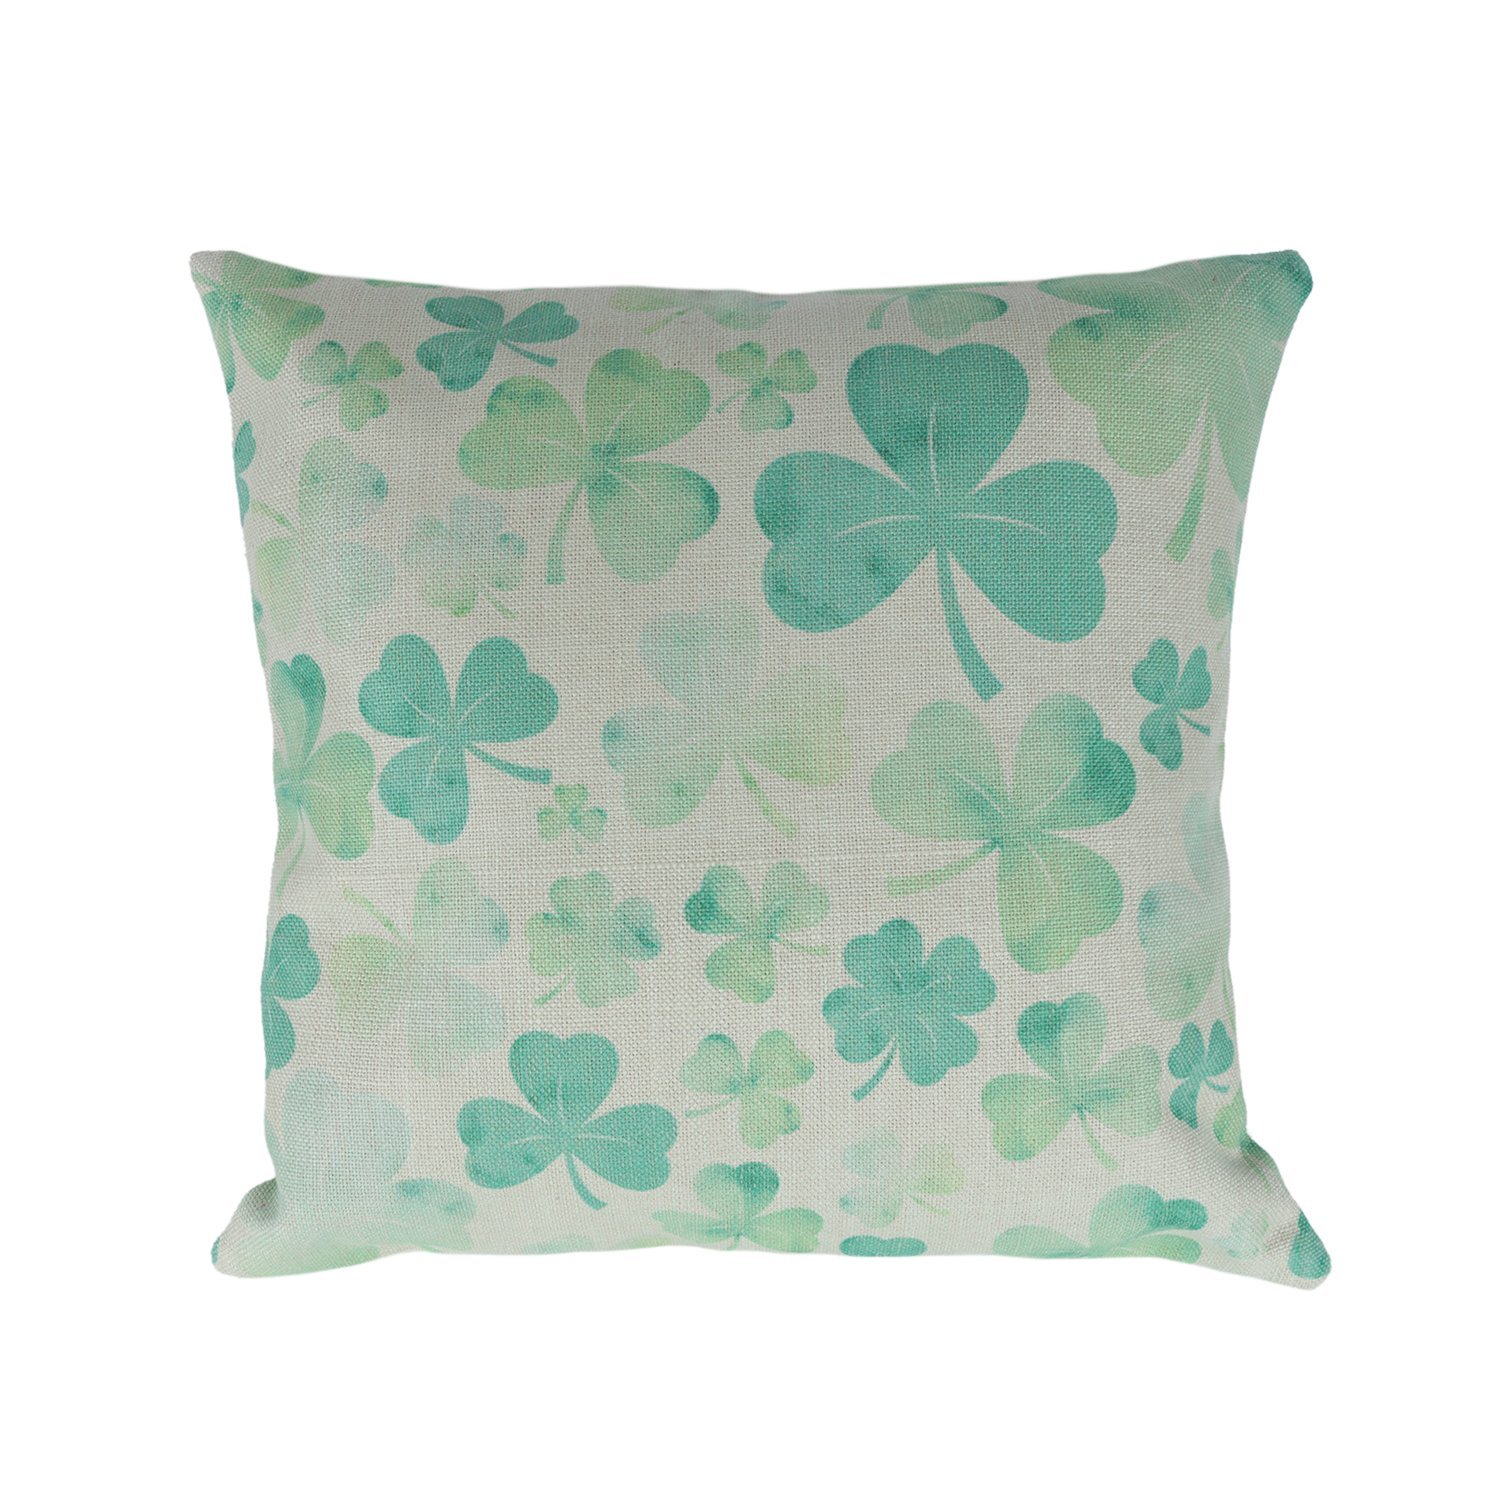 Spring Pillow Covers Under $10!